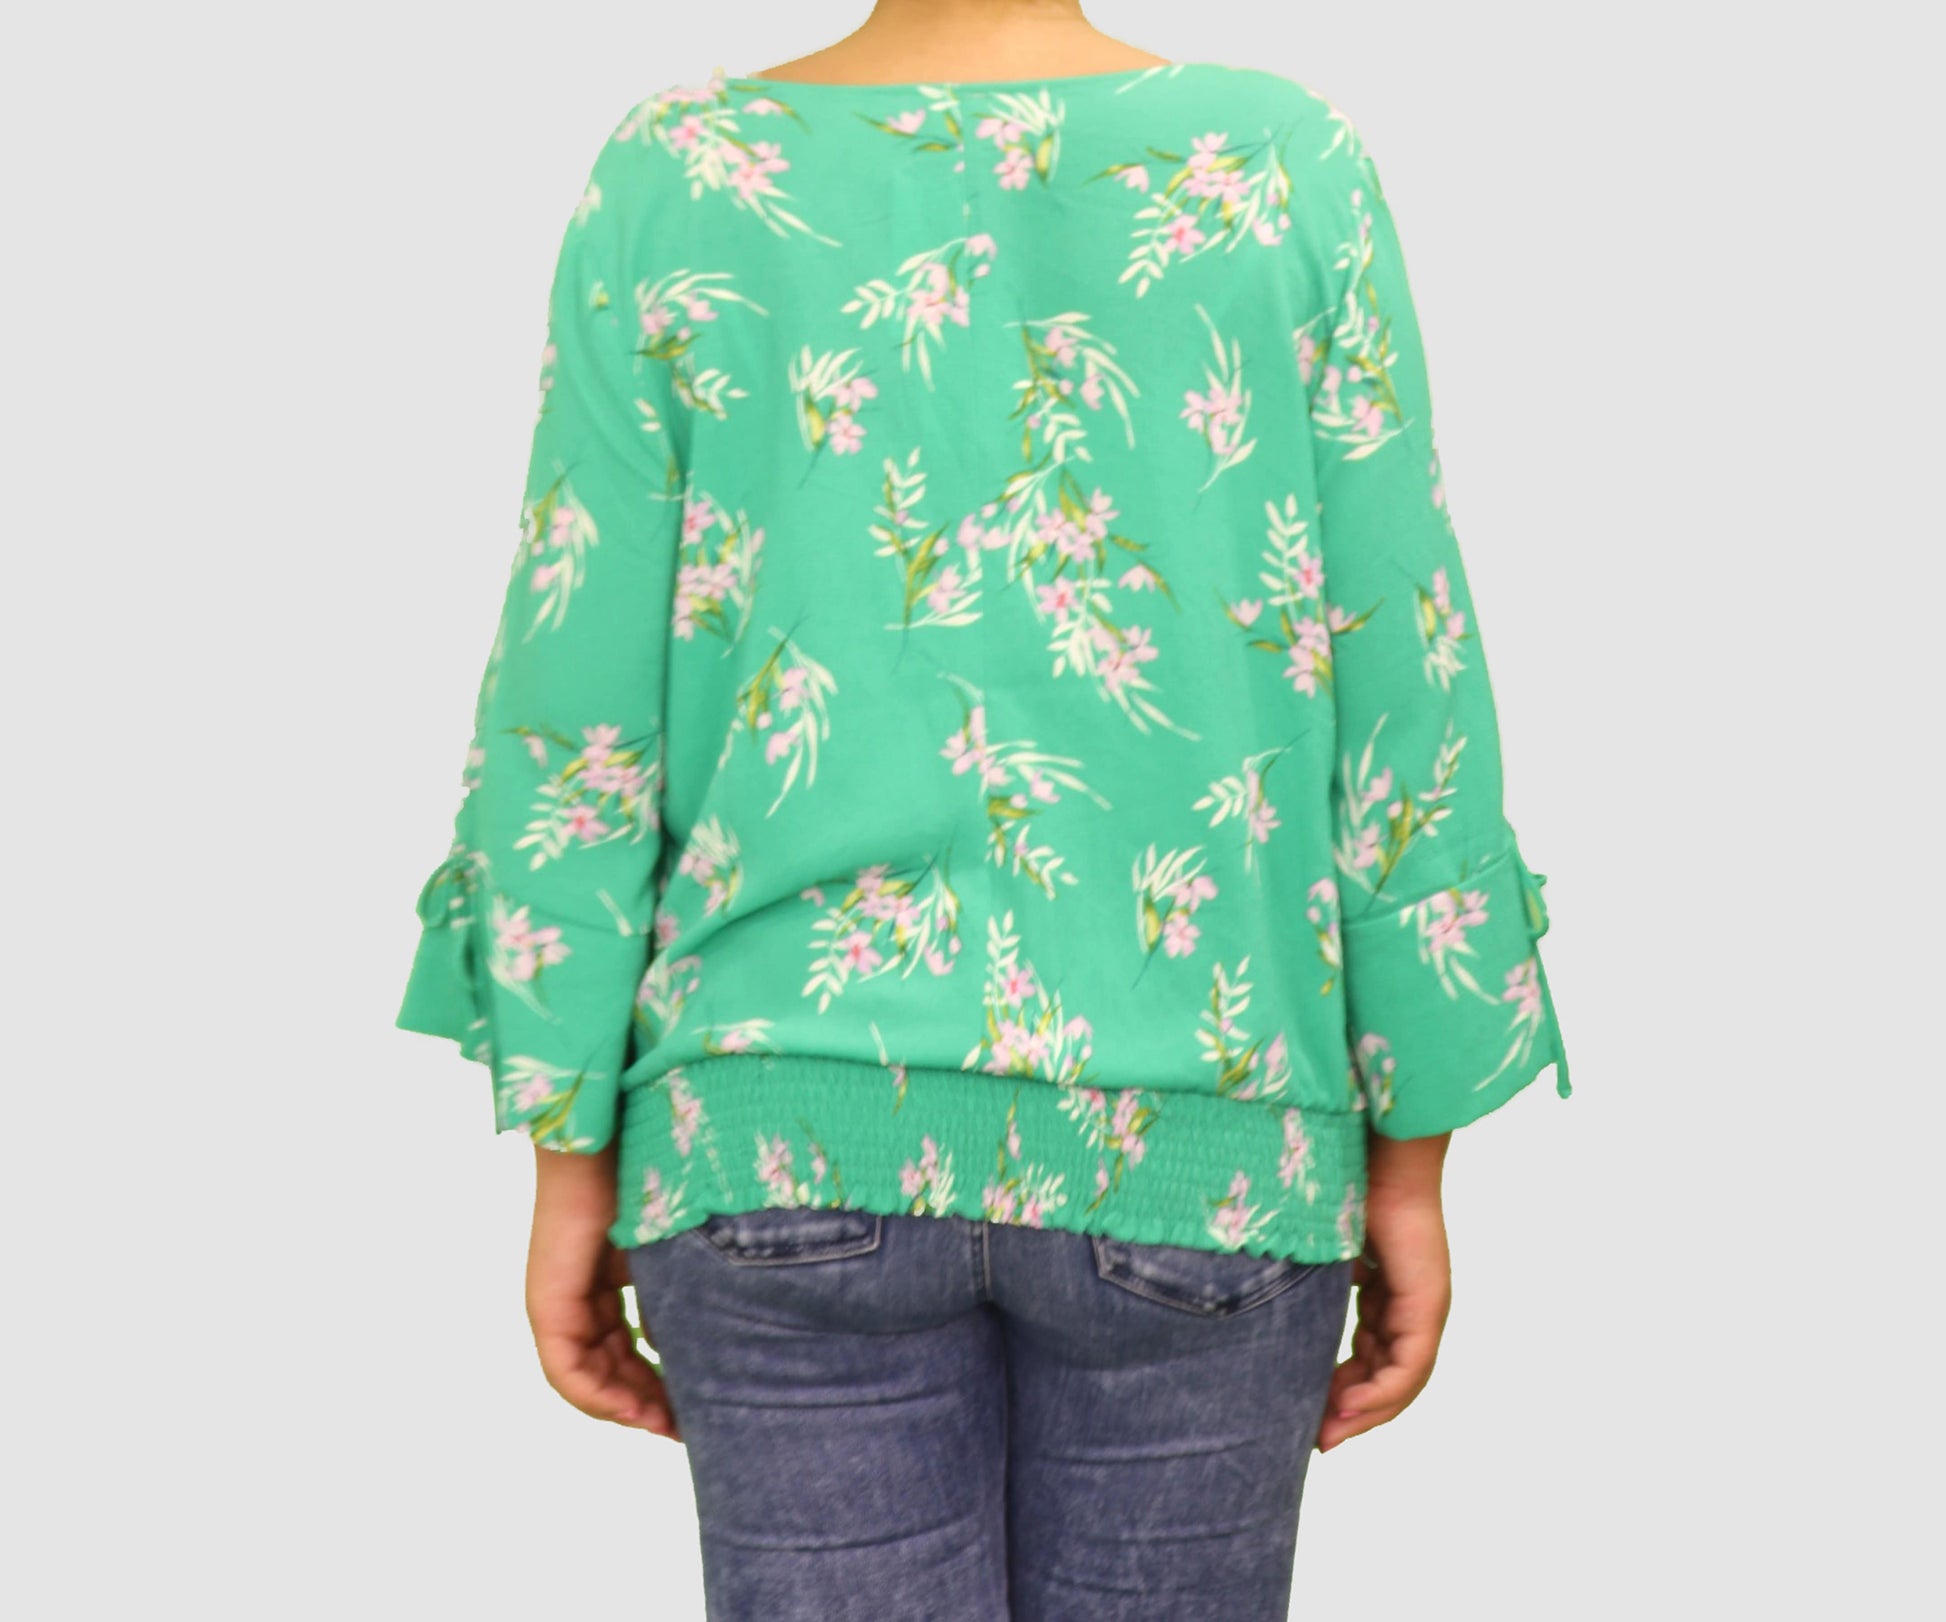 Lily White Womens Tops X-Large / Green / Multi Three Quarter Sleeve Top